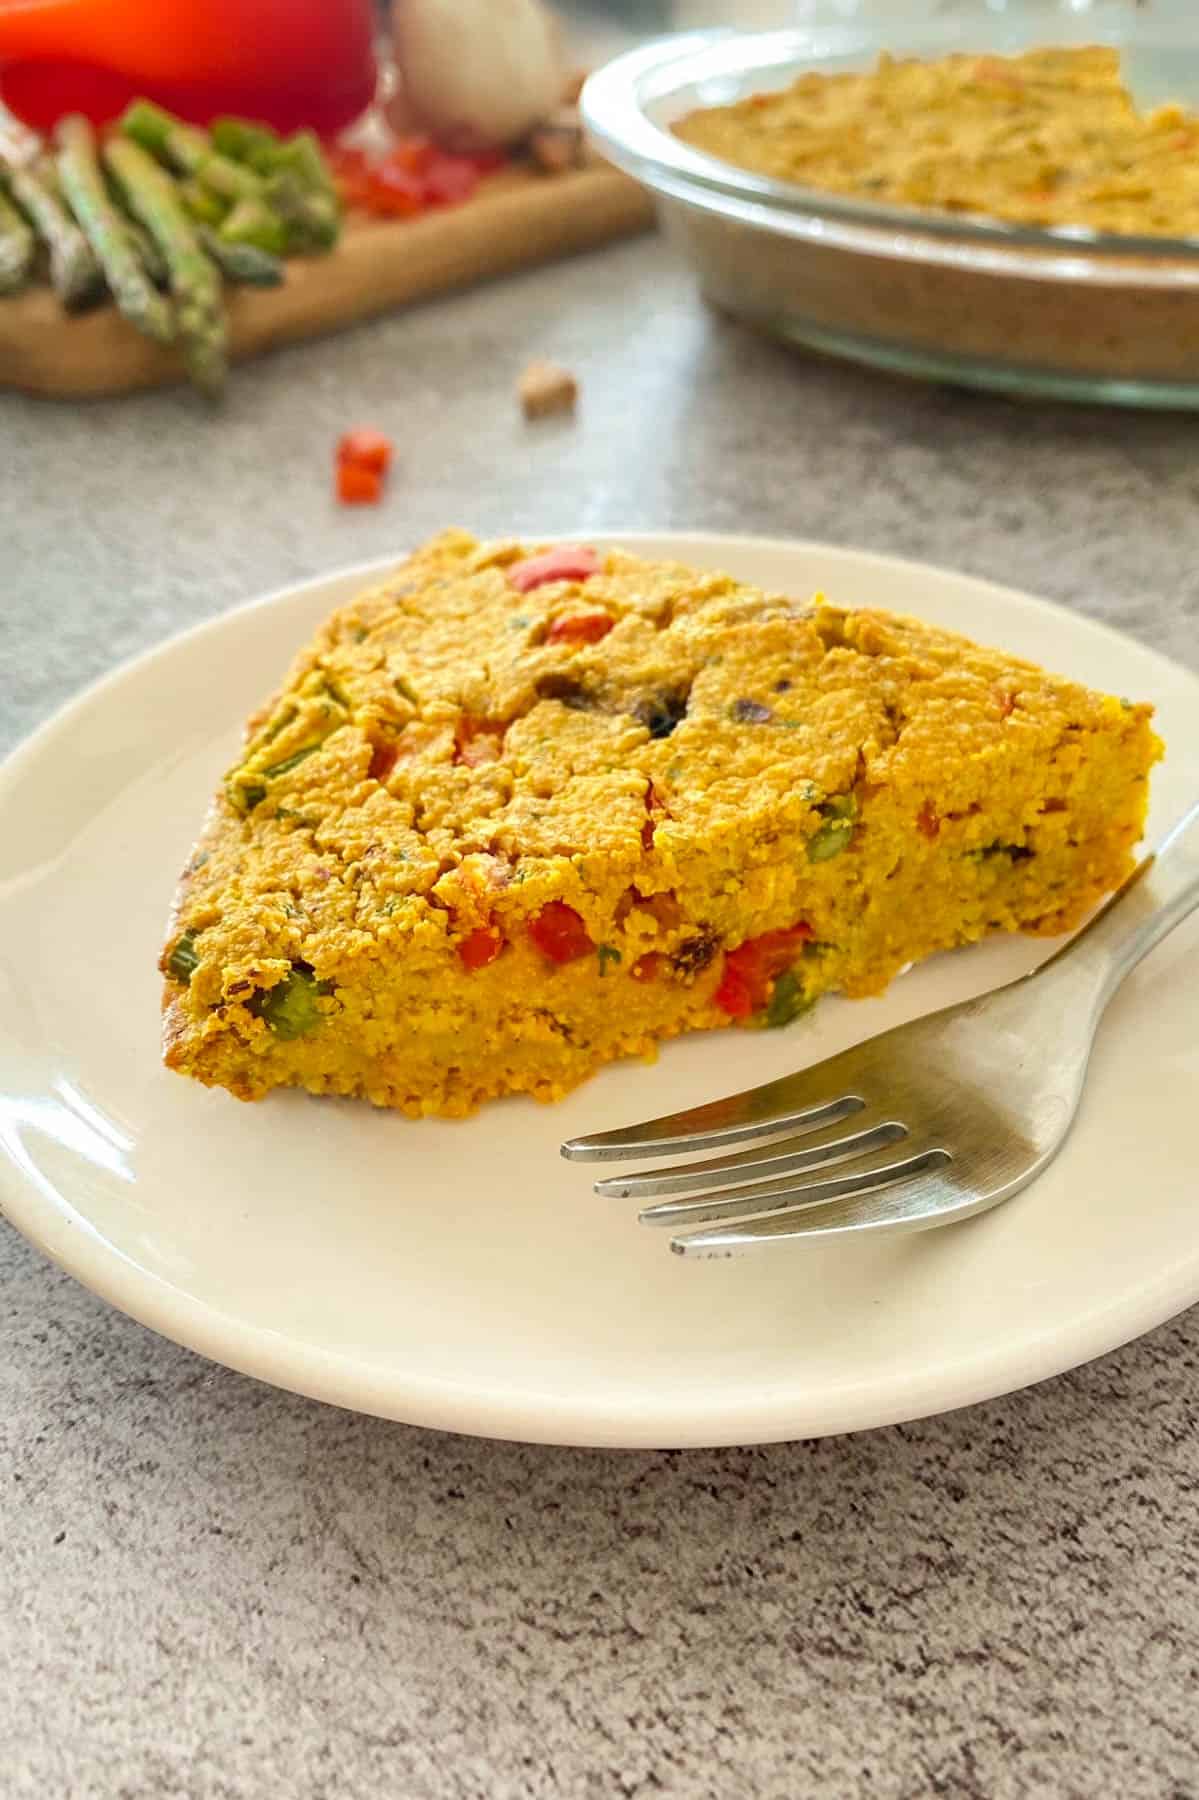 Slice of vegan frittata on small plate with fork, with remaining frittata in background.